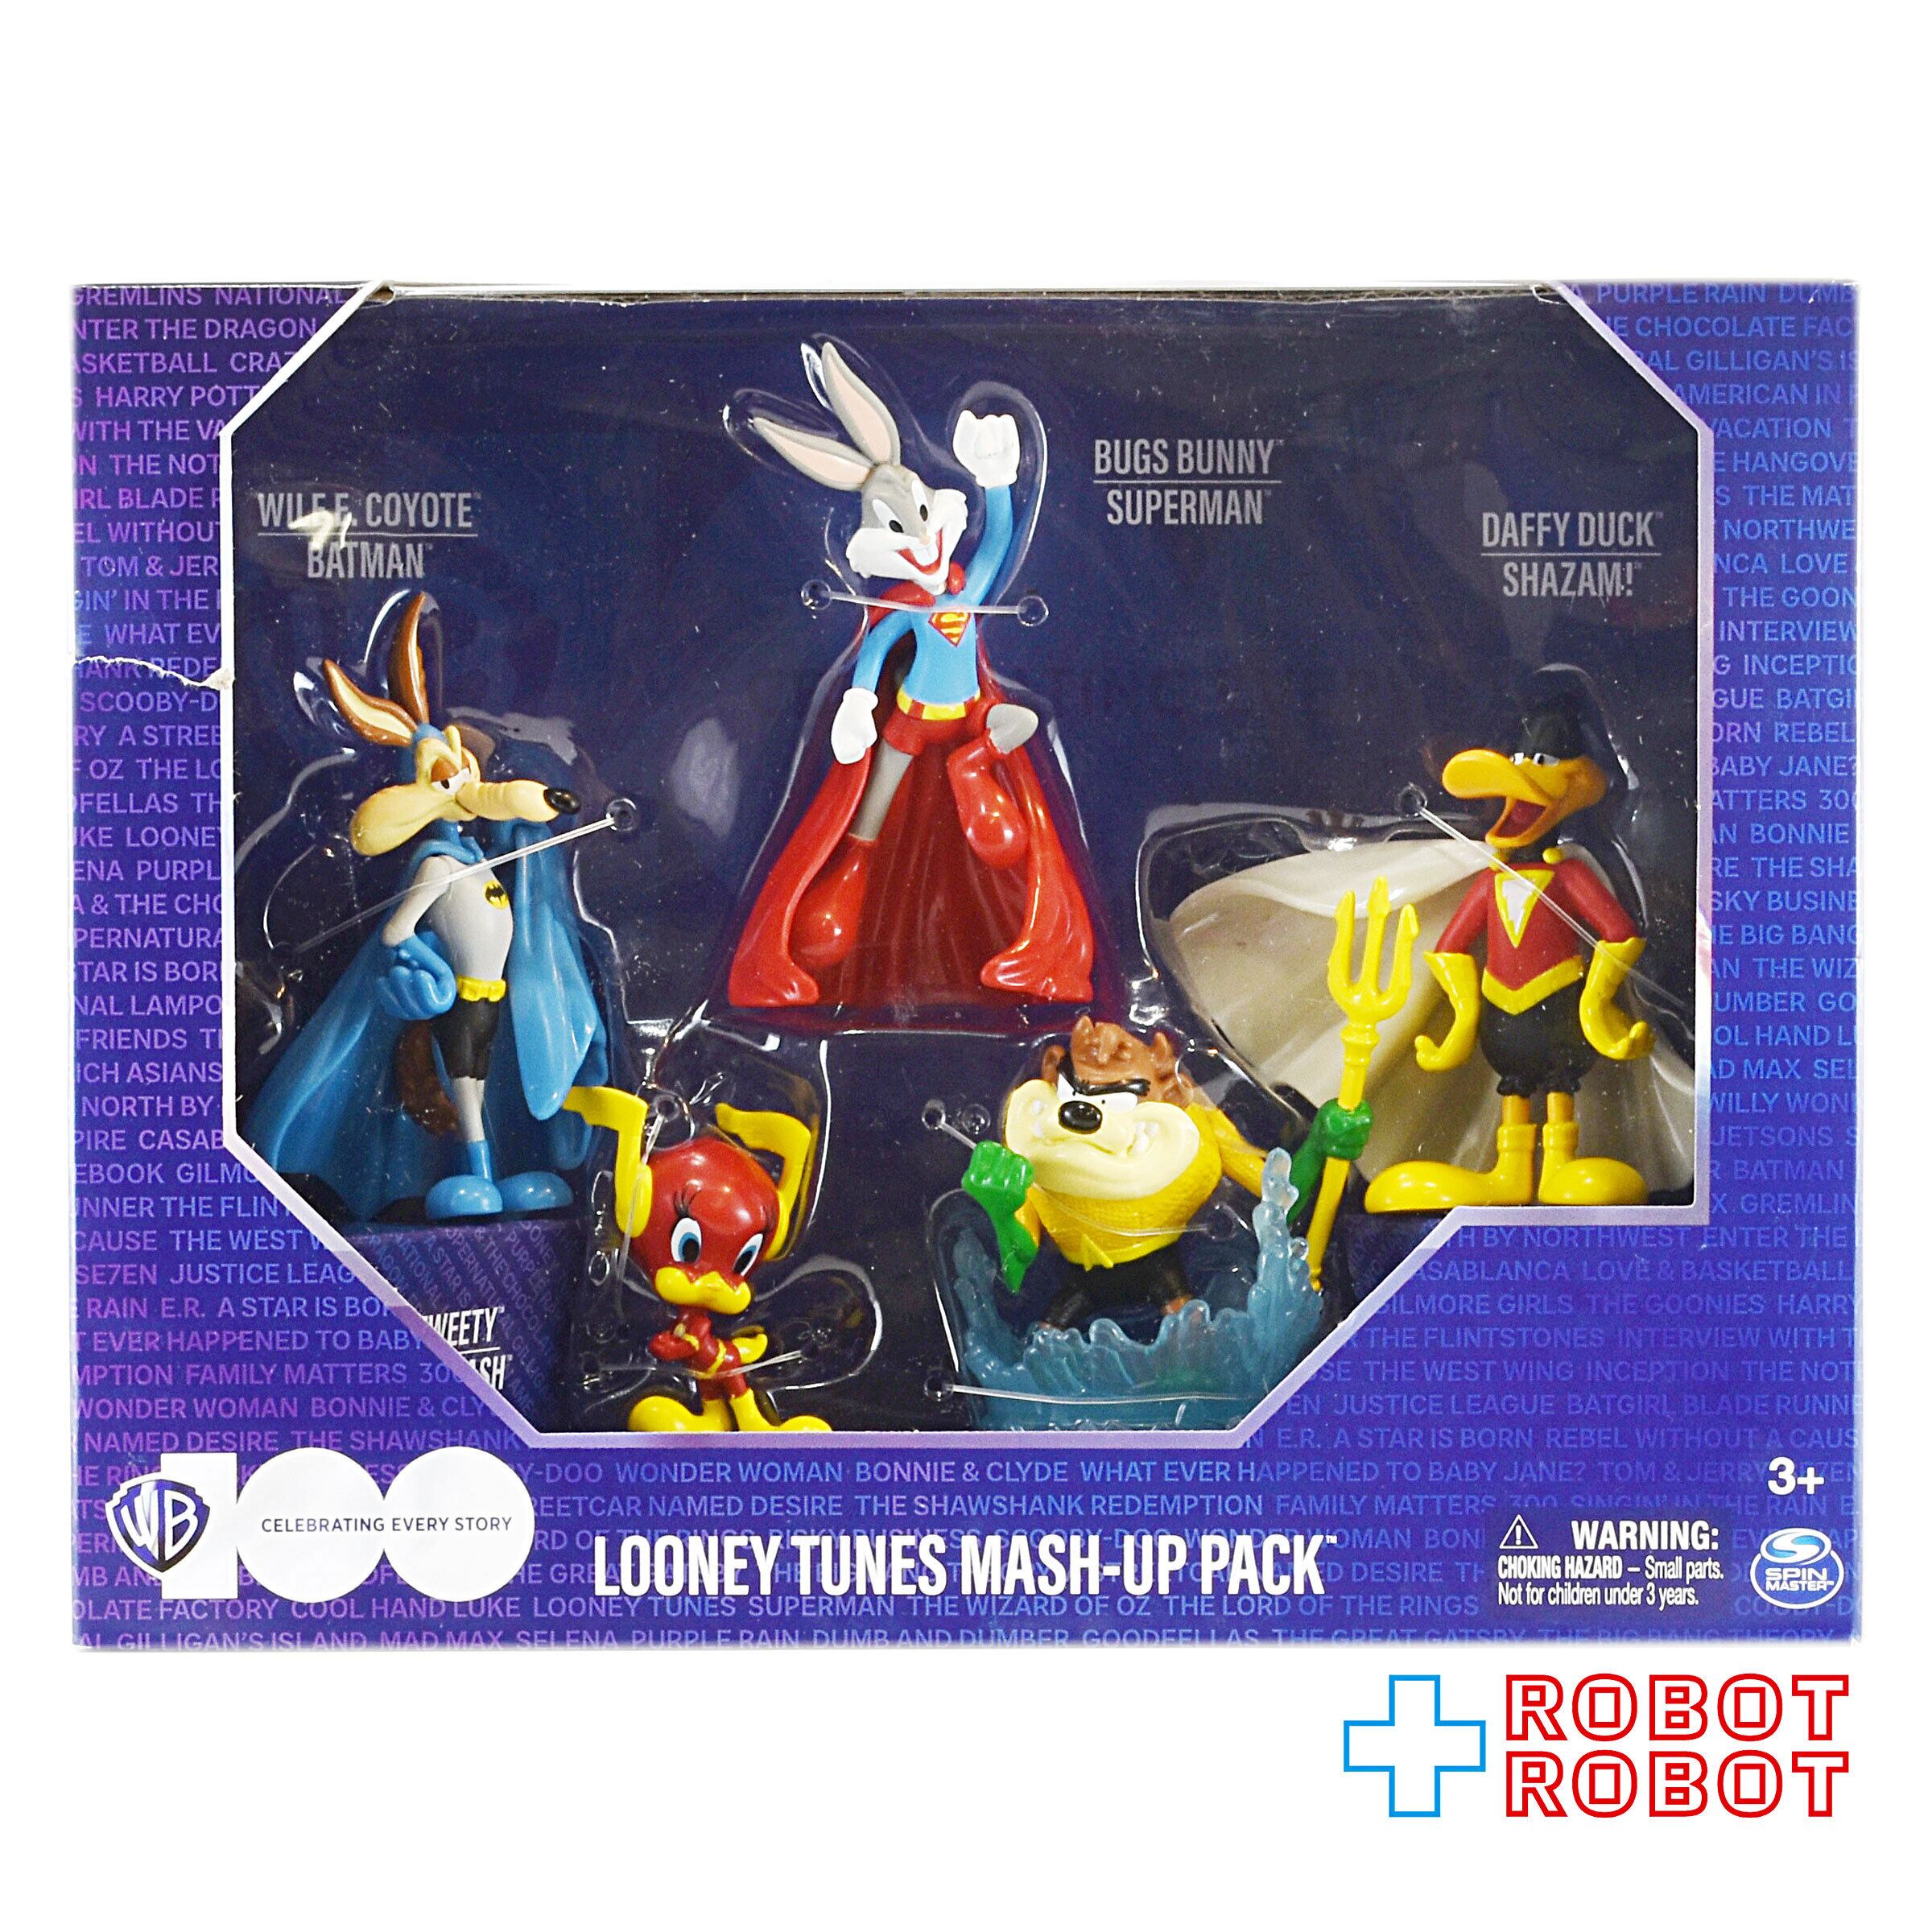 LOONEY TUNES MASH-UP PACKアメコミ - アメコミ